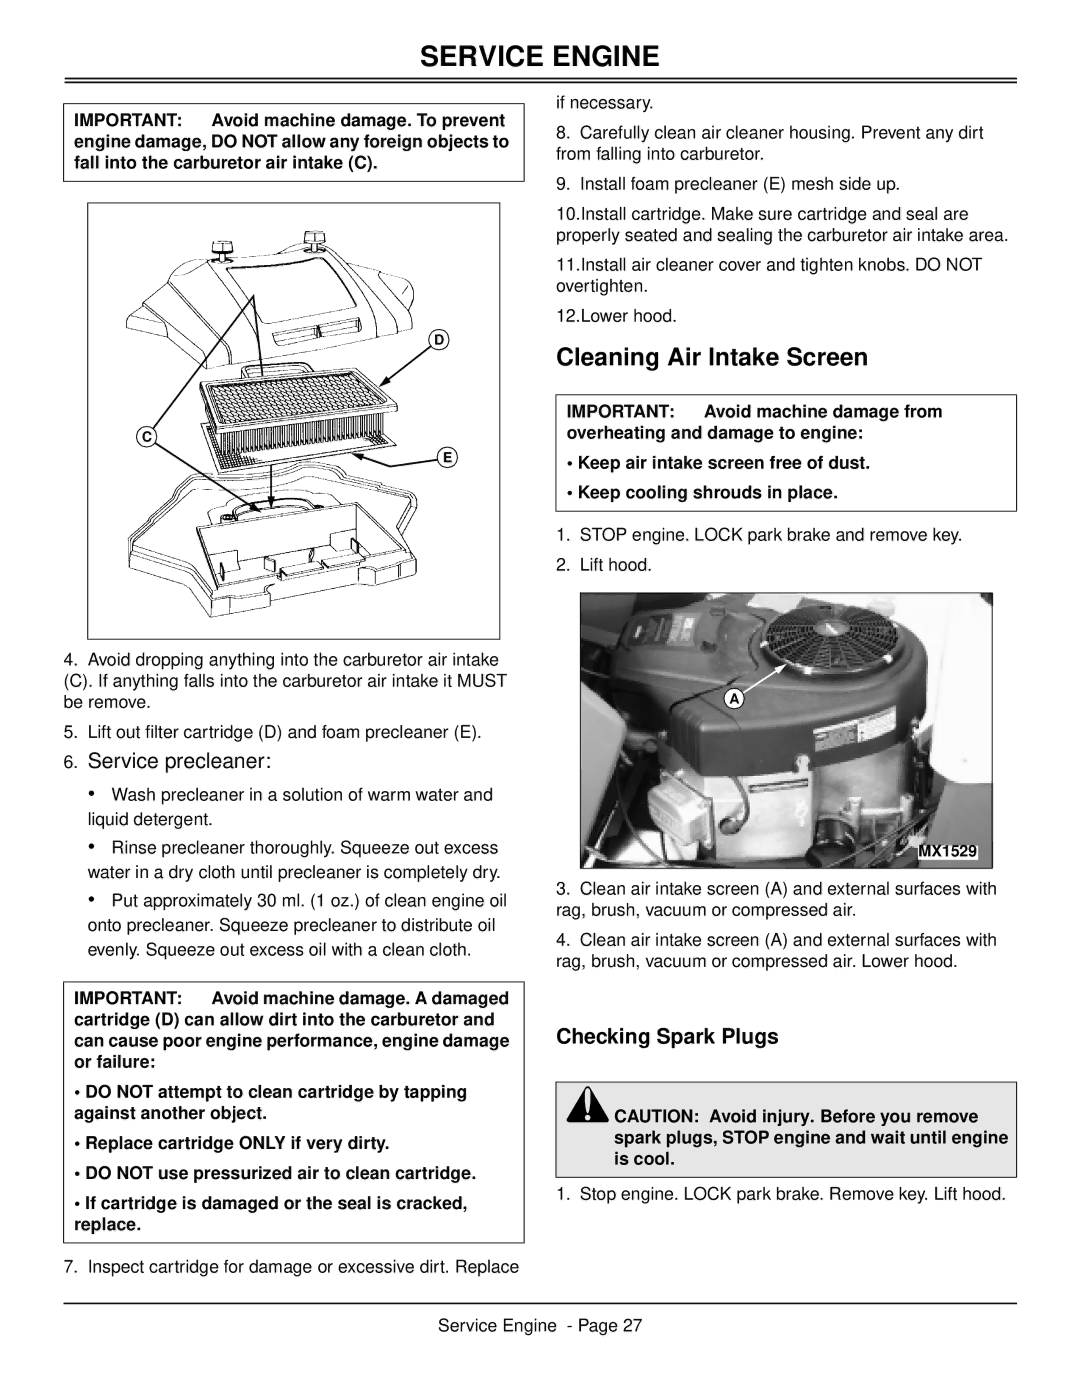 Scotts S2546 manual Service precleaner, Checking Spark Plugs 